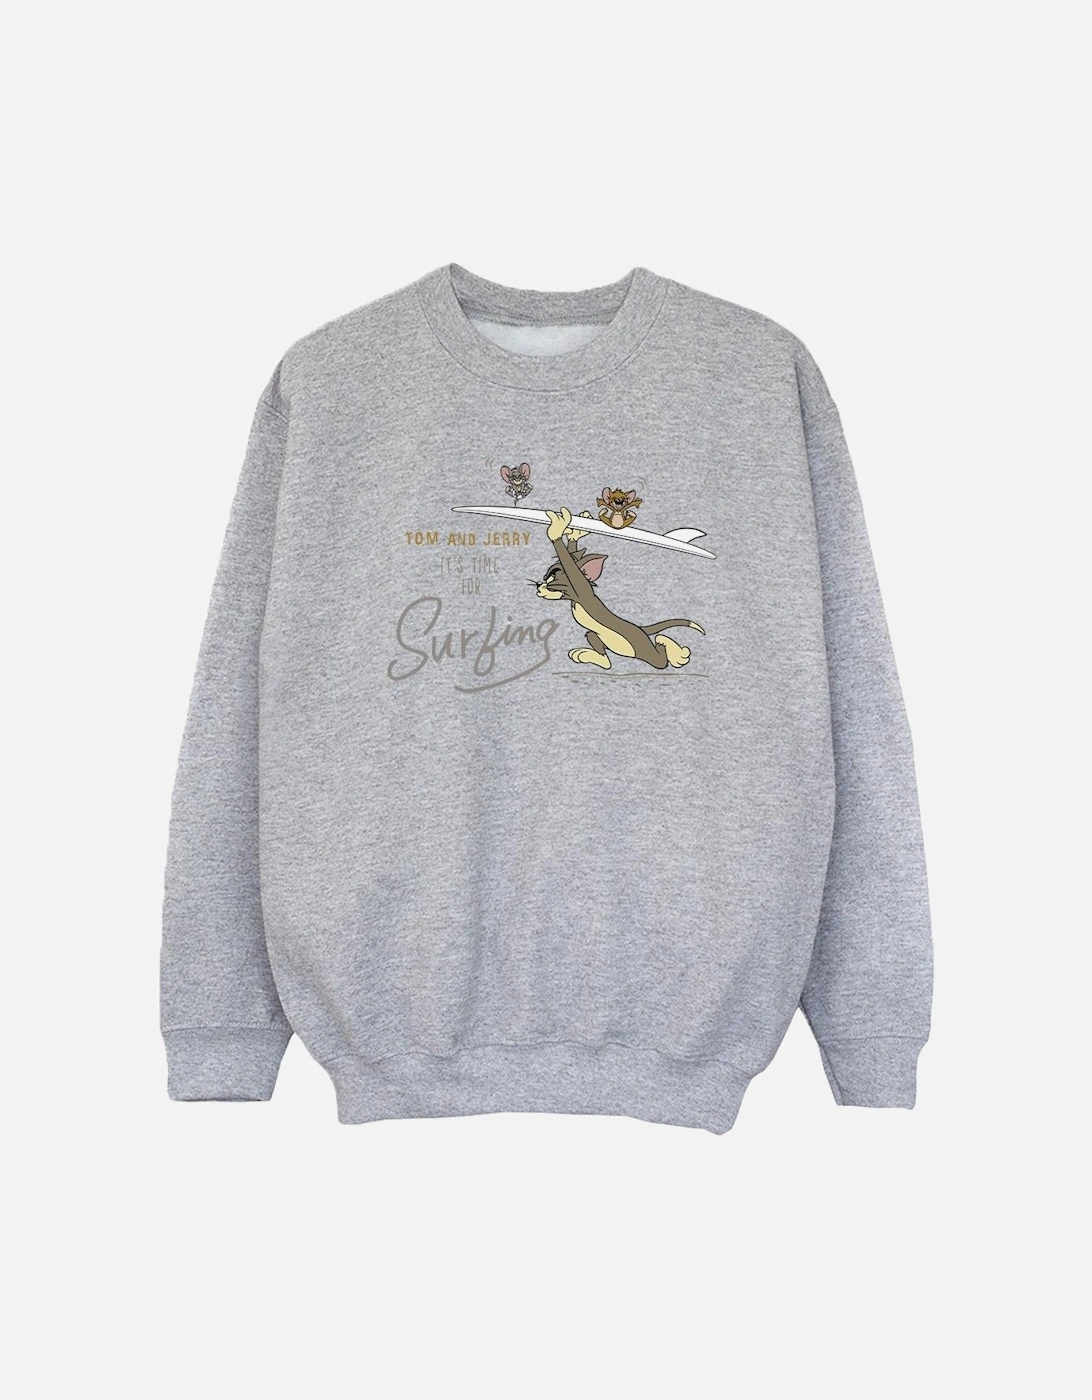 Tom And Jerry Girls It?'s Time For Surfing Sweatshirt, 4 of 3